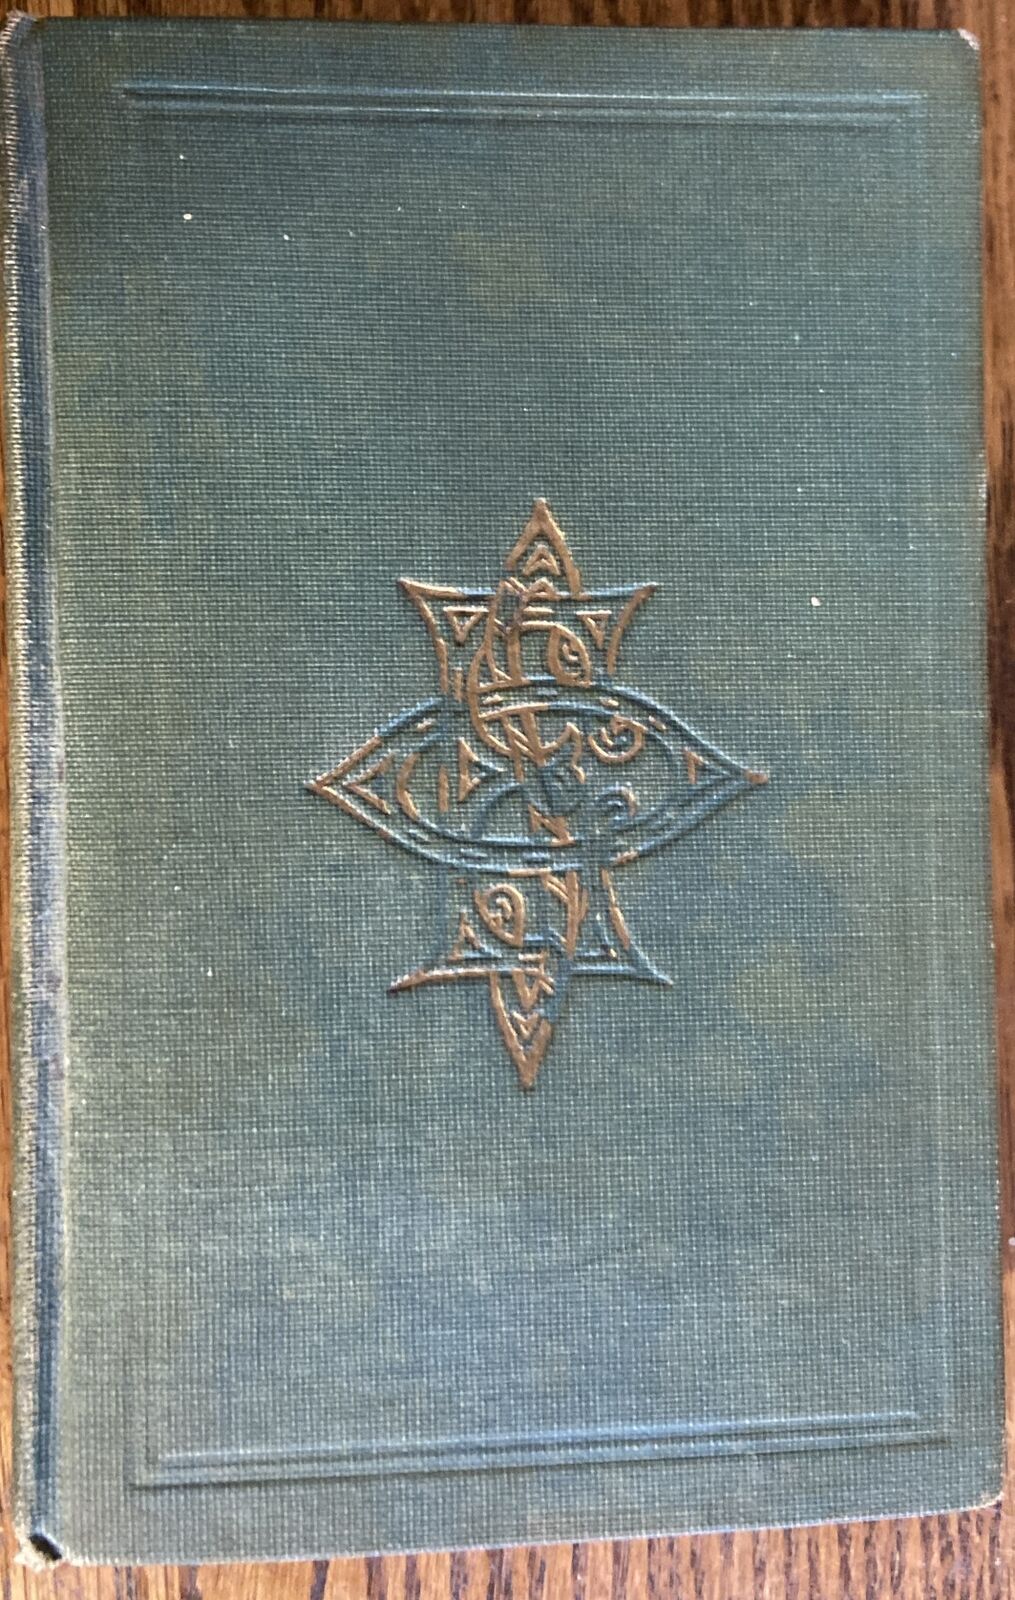 JULY 1928 1ST EDITION NEW RITUAL ORDER OF THE EASTERN STAR General Grand Chapter